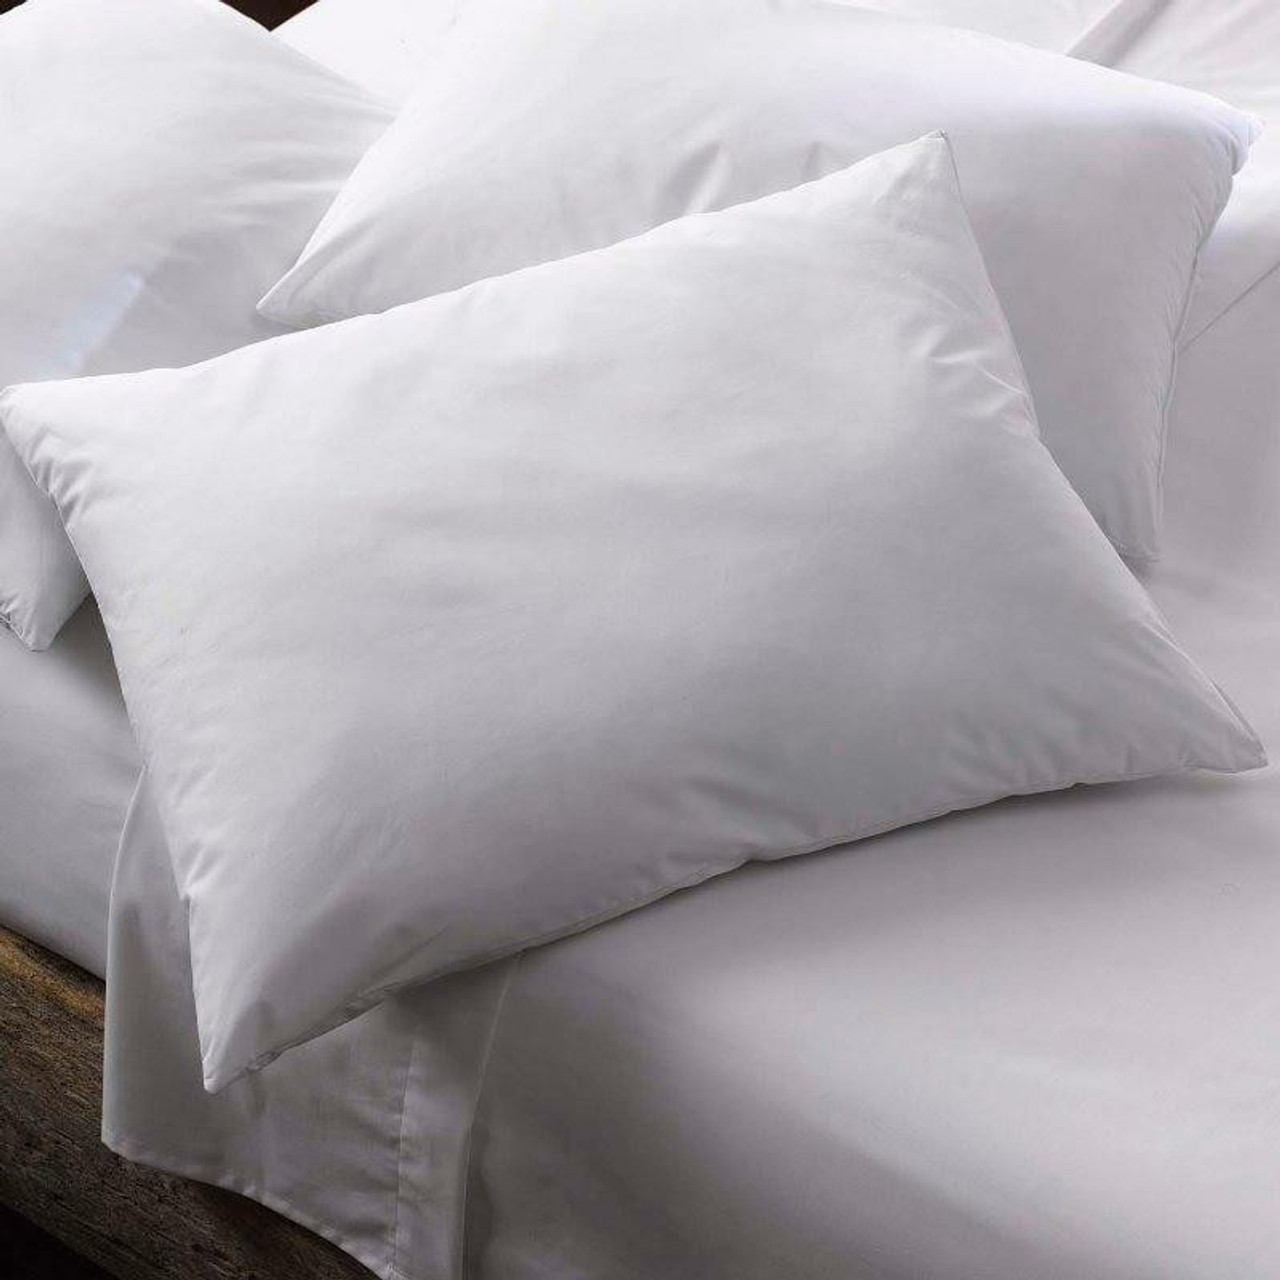 WestPoint Hospitality by Martex WESTPOINT or MARTEX or GREEN SOLID or PILLOW or STANDARD or 20x26 or 22OZ or PACK OF 12